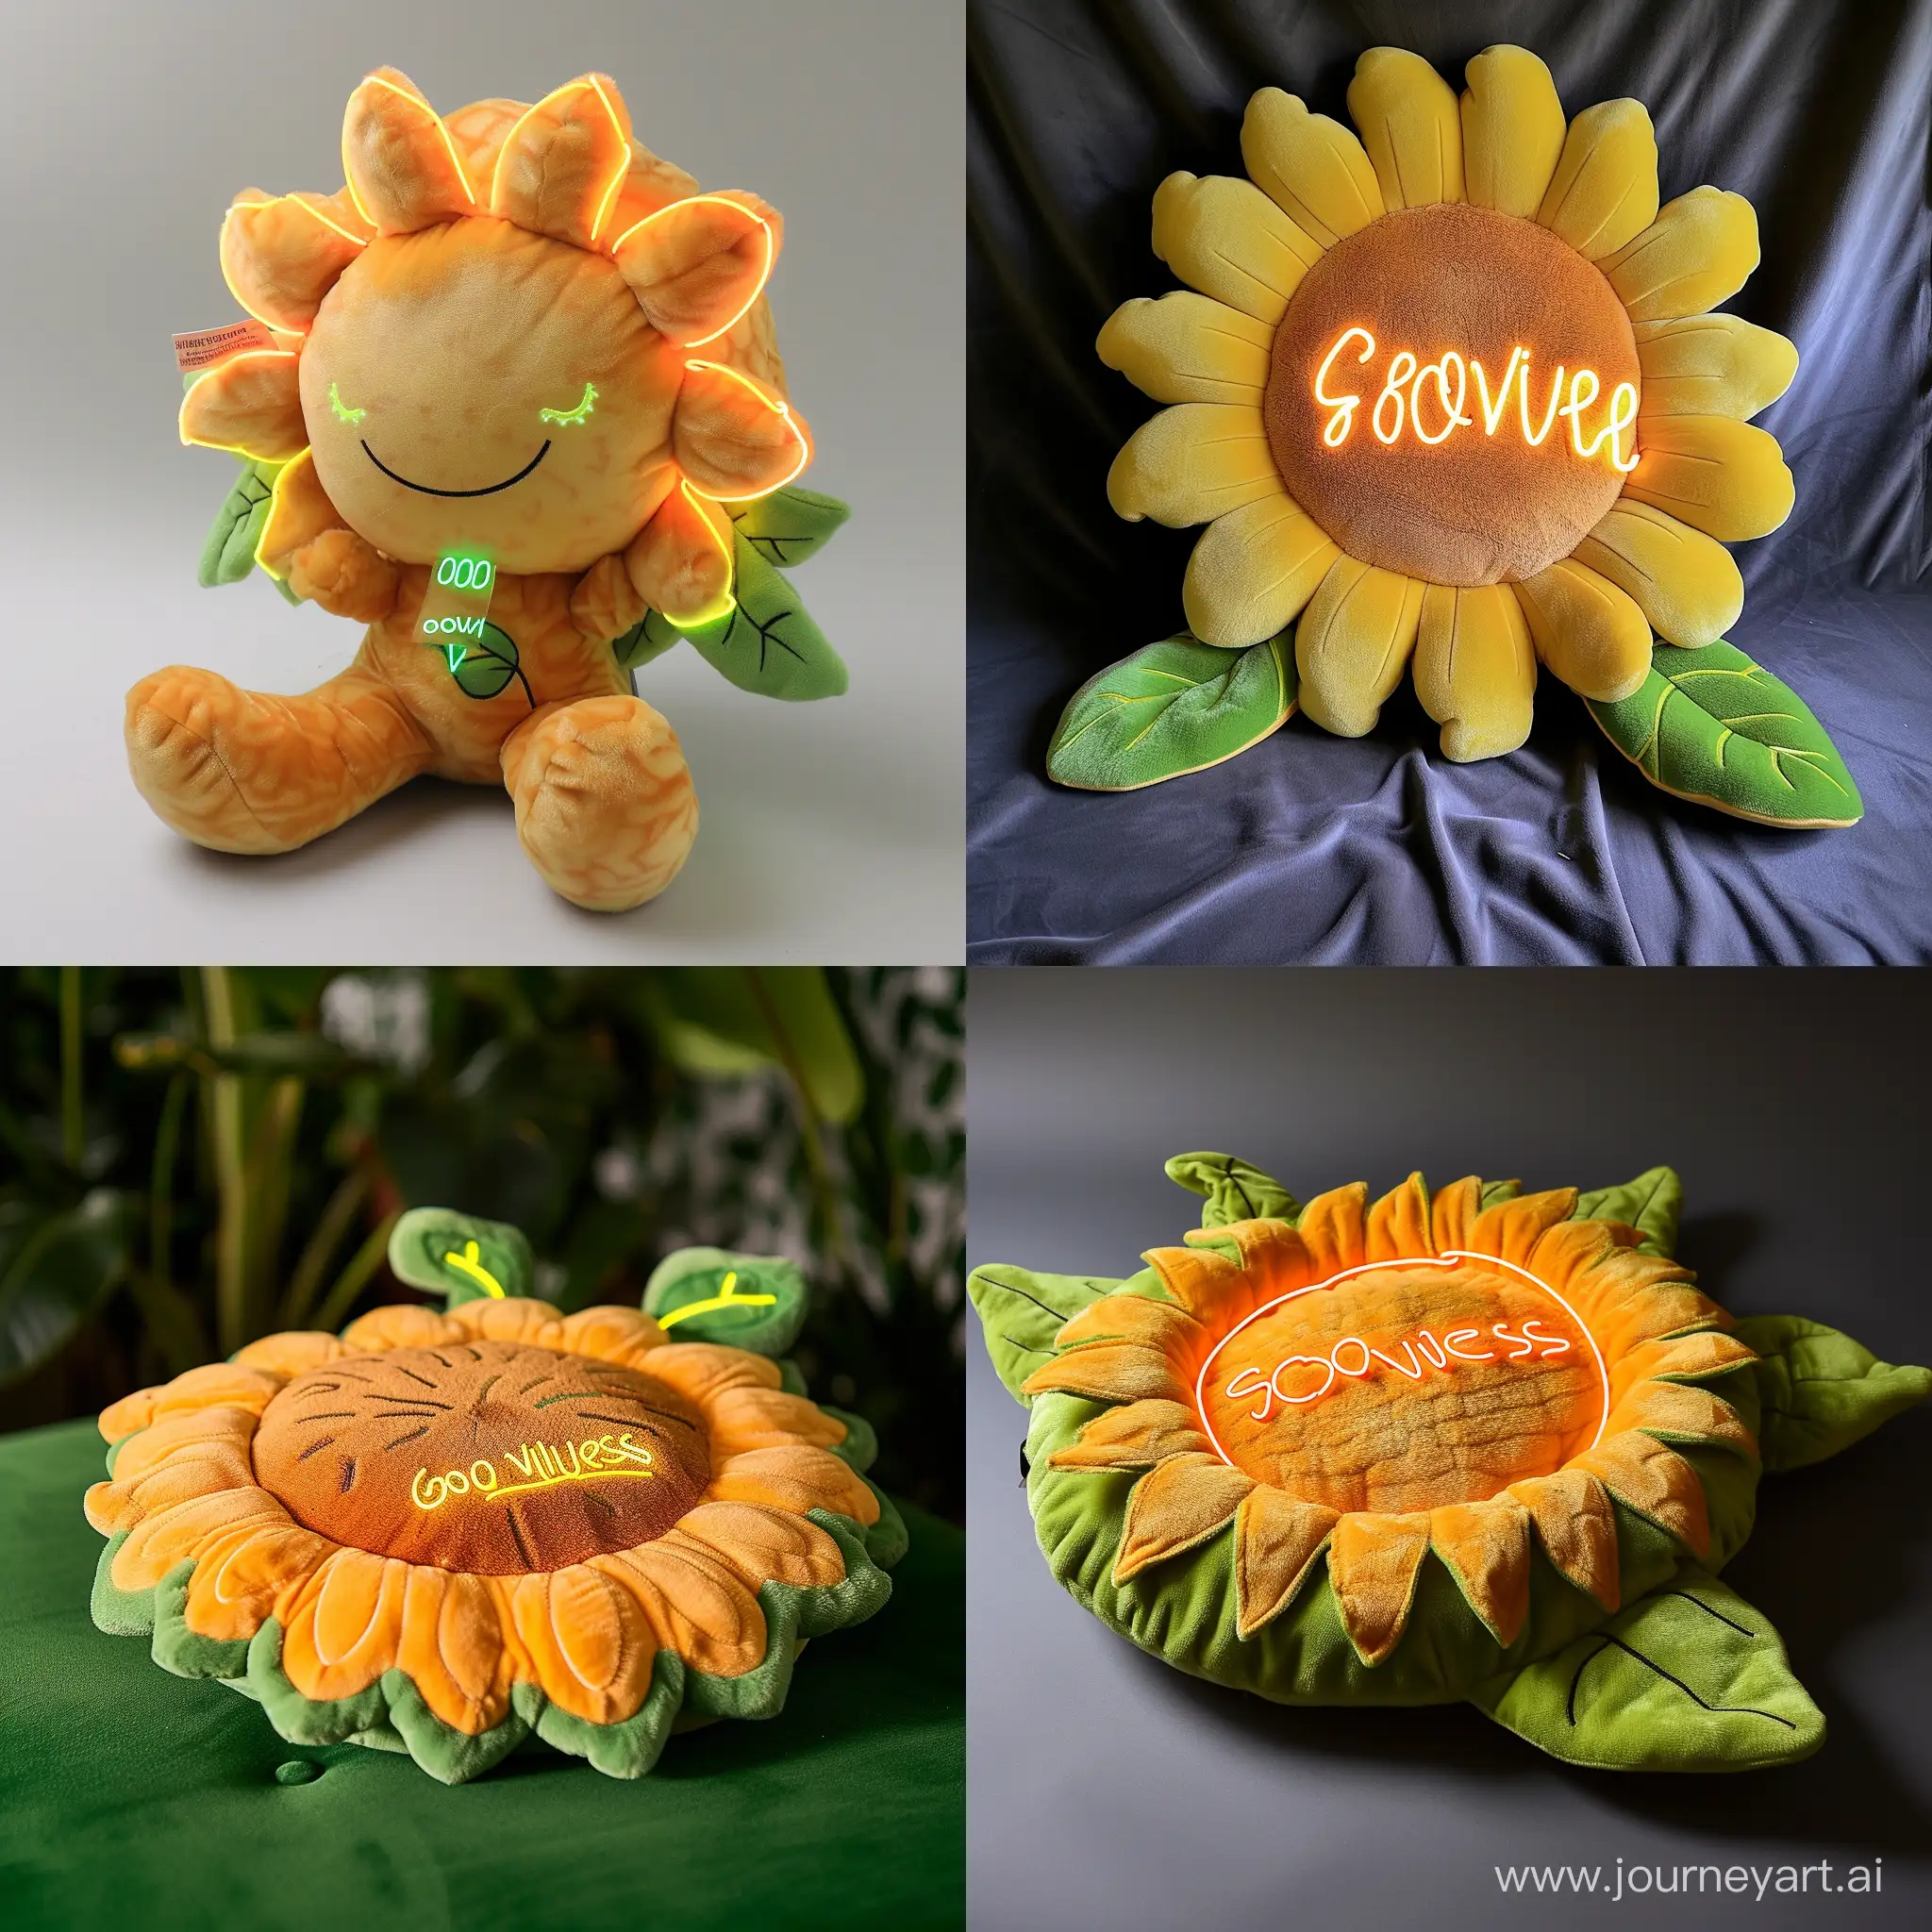 Cheerful-Sunflower-Plush-with-Neon-Good-Vibes-Text